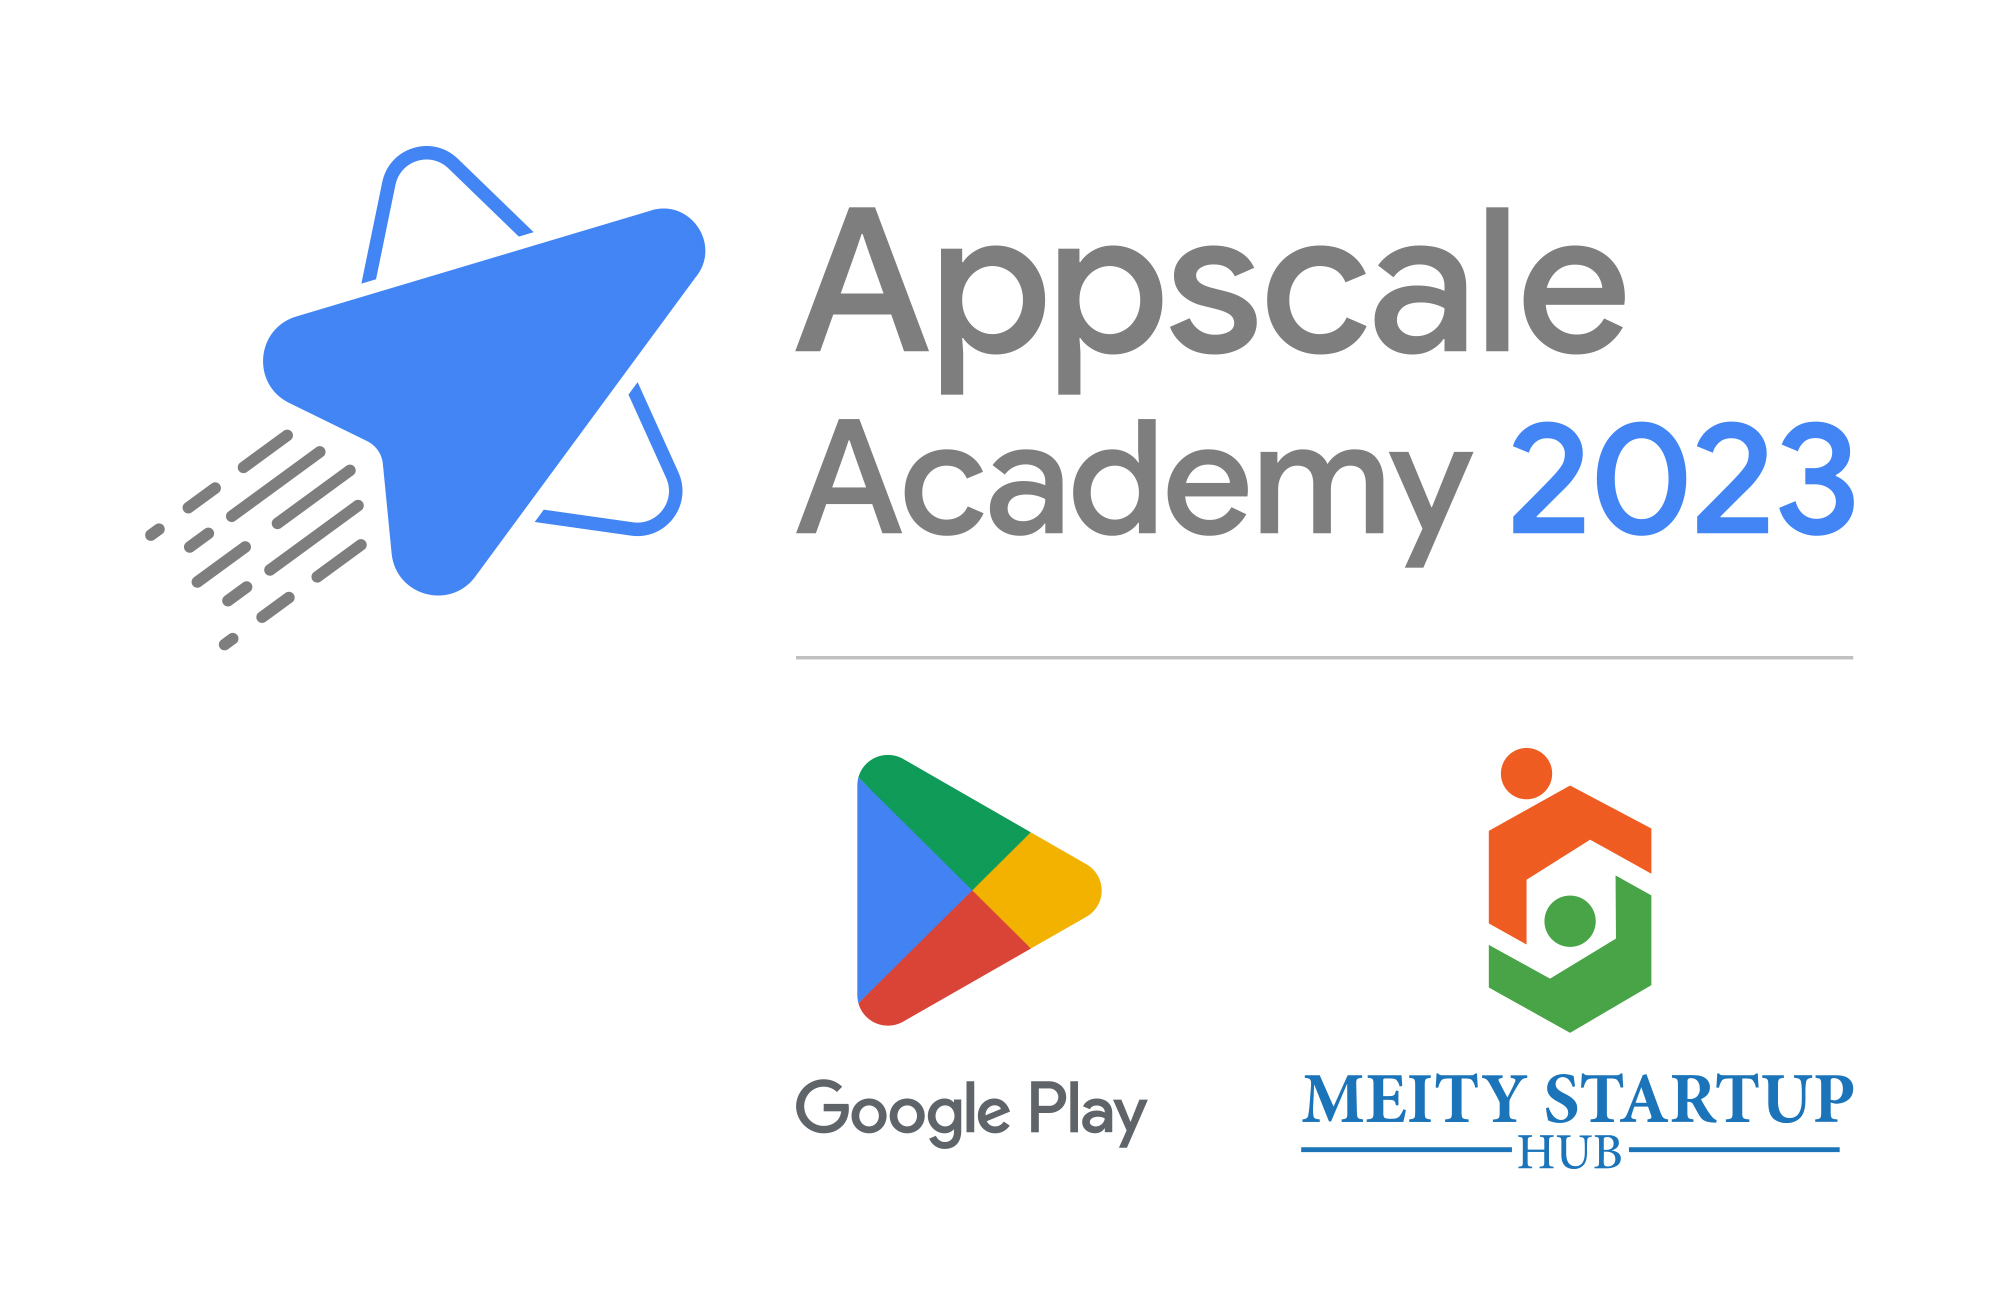 As a component of Appscale Academy''''s Class of 2023, MeitYStartup Hub and Google will provide assistance to 100 Indian startups